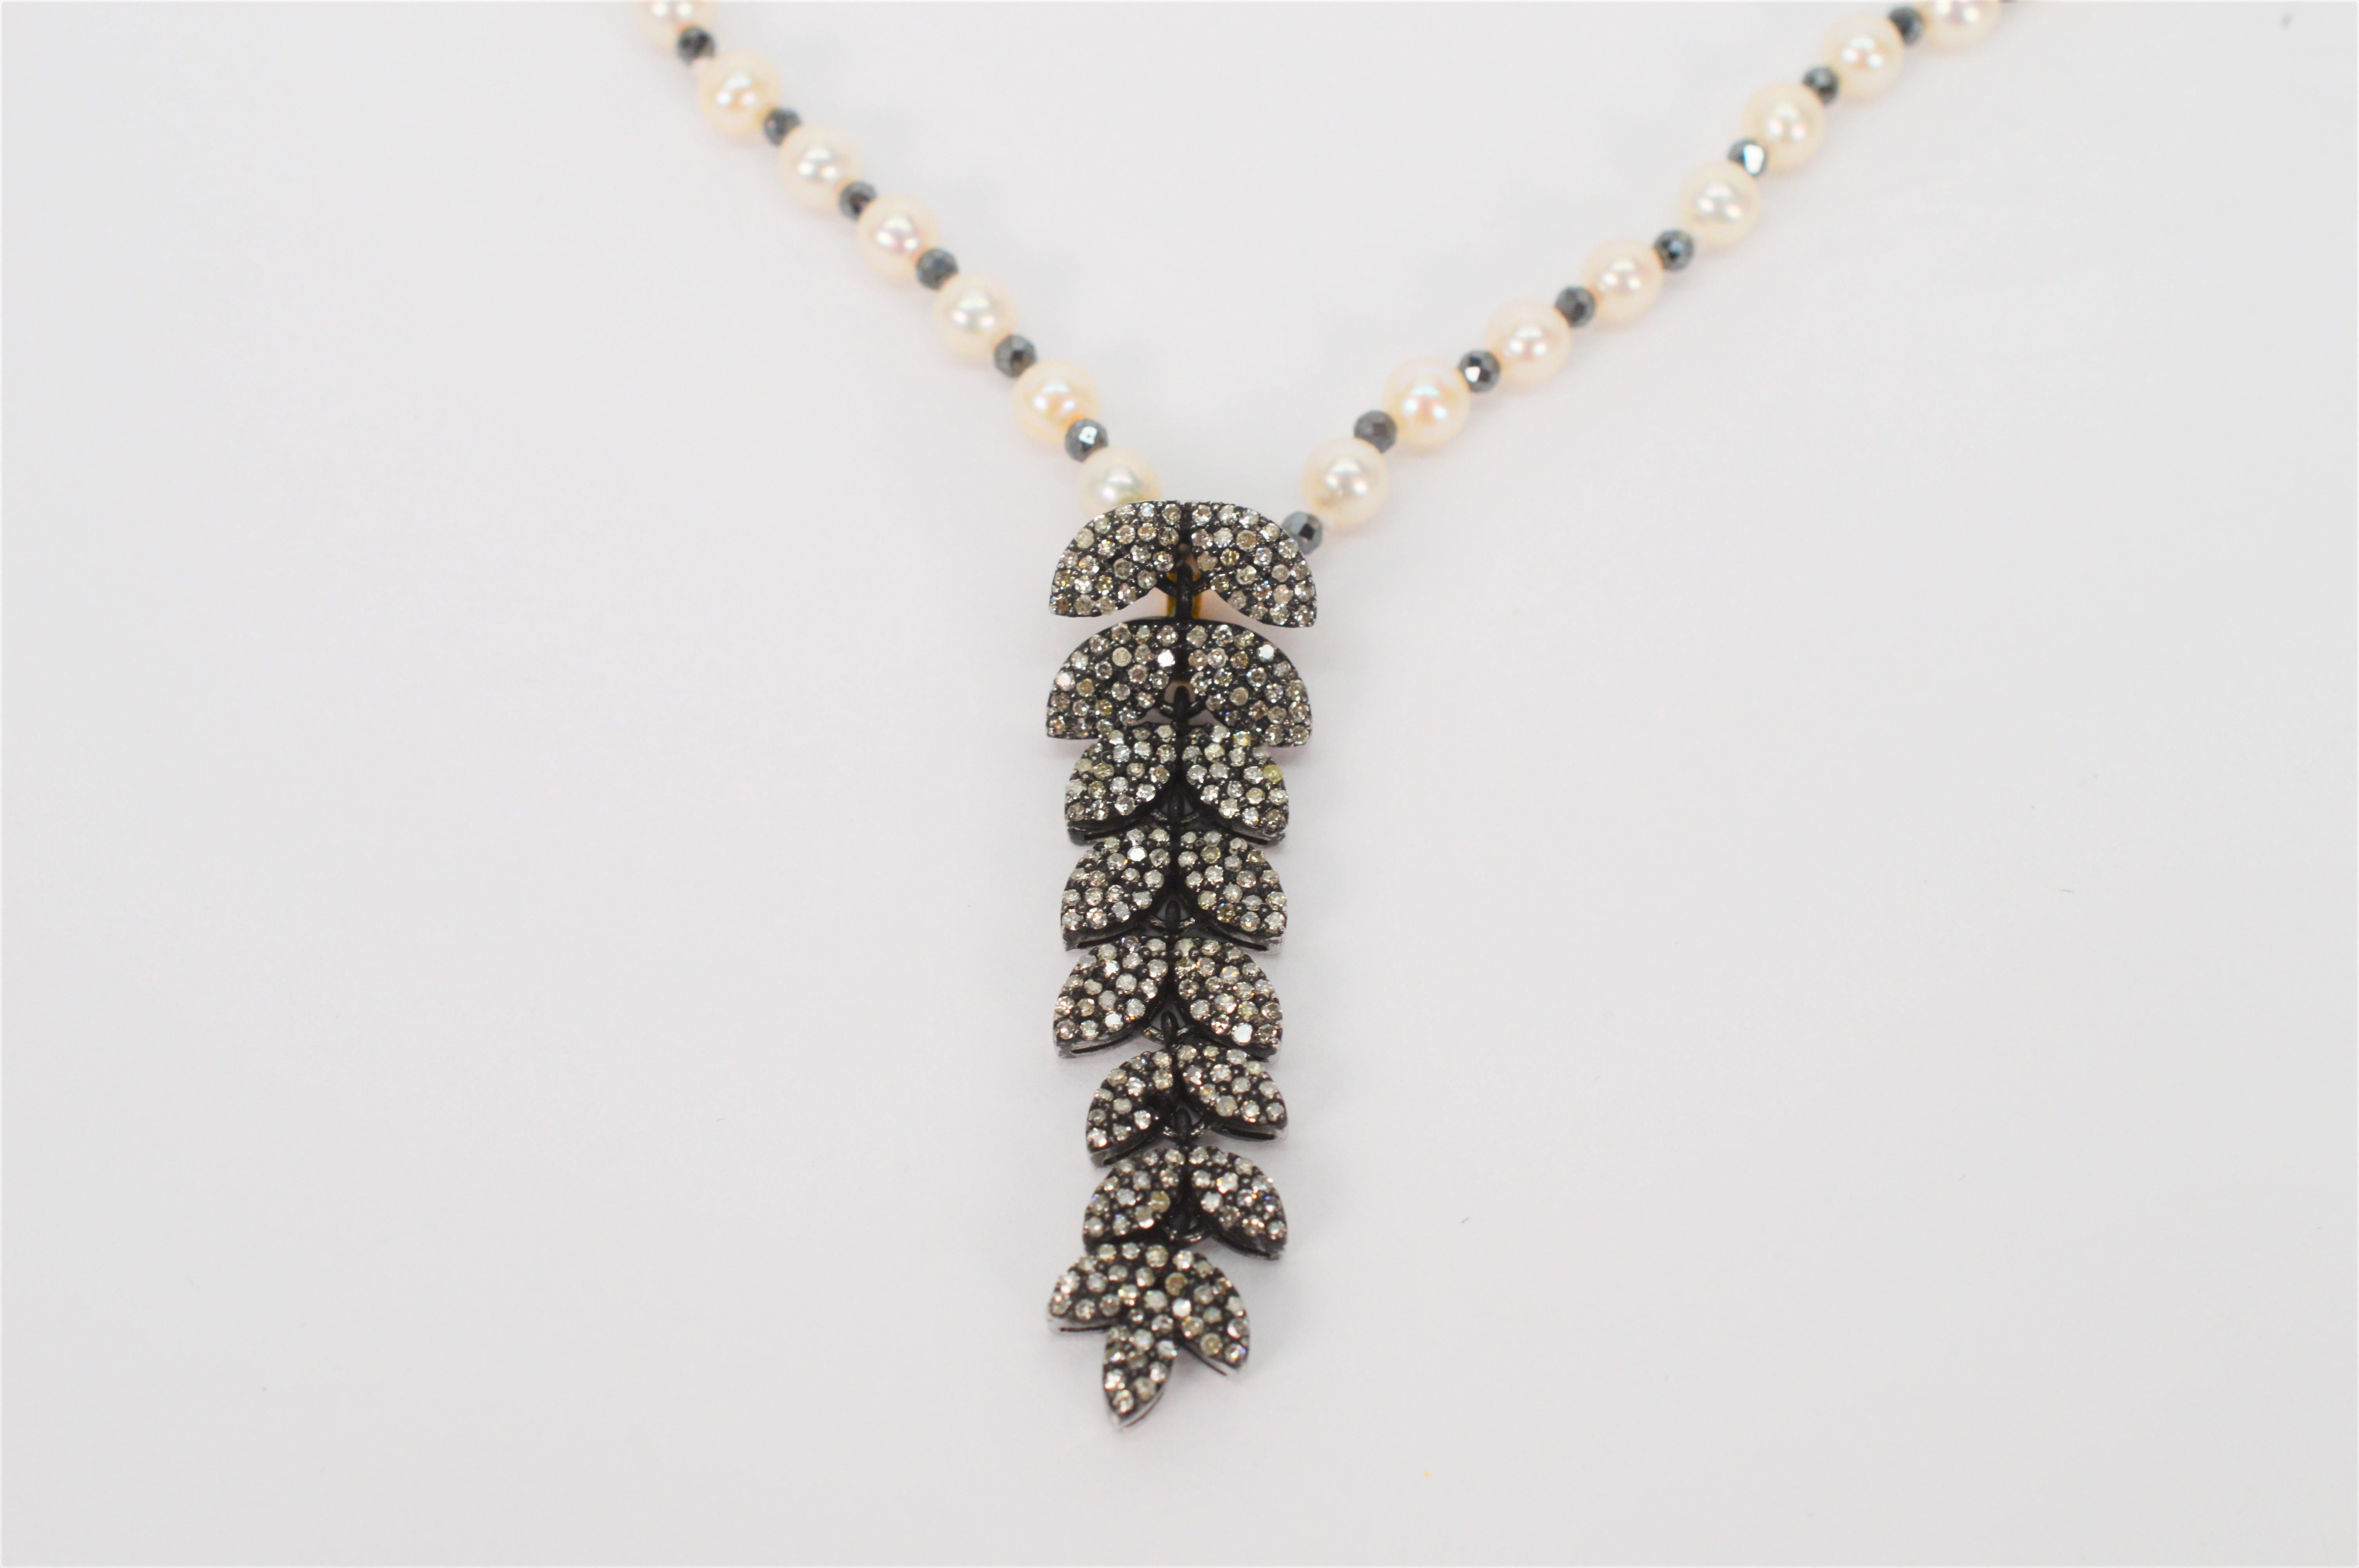 Stunning on that little black dress or sweater is this unique diamond and sterling silver cascading pendant adorning a hand strung 27 inch AAA Lustrous Round Akoya pearl necklace. The 4 mm pearl strand is accented with natural pyrite crystals and